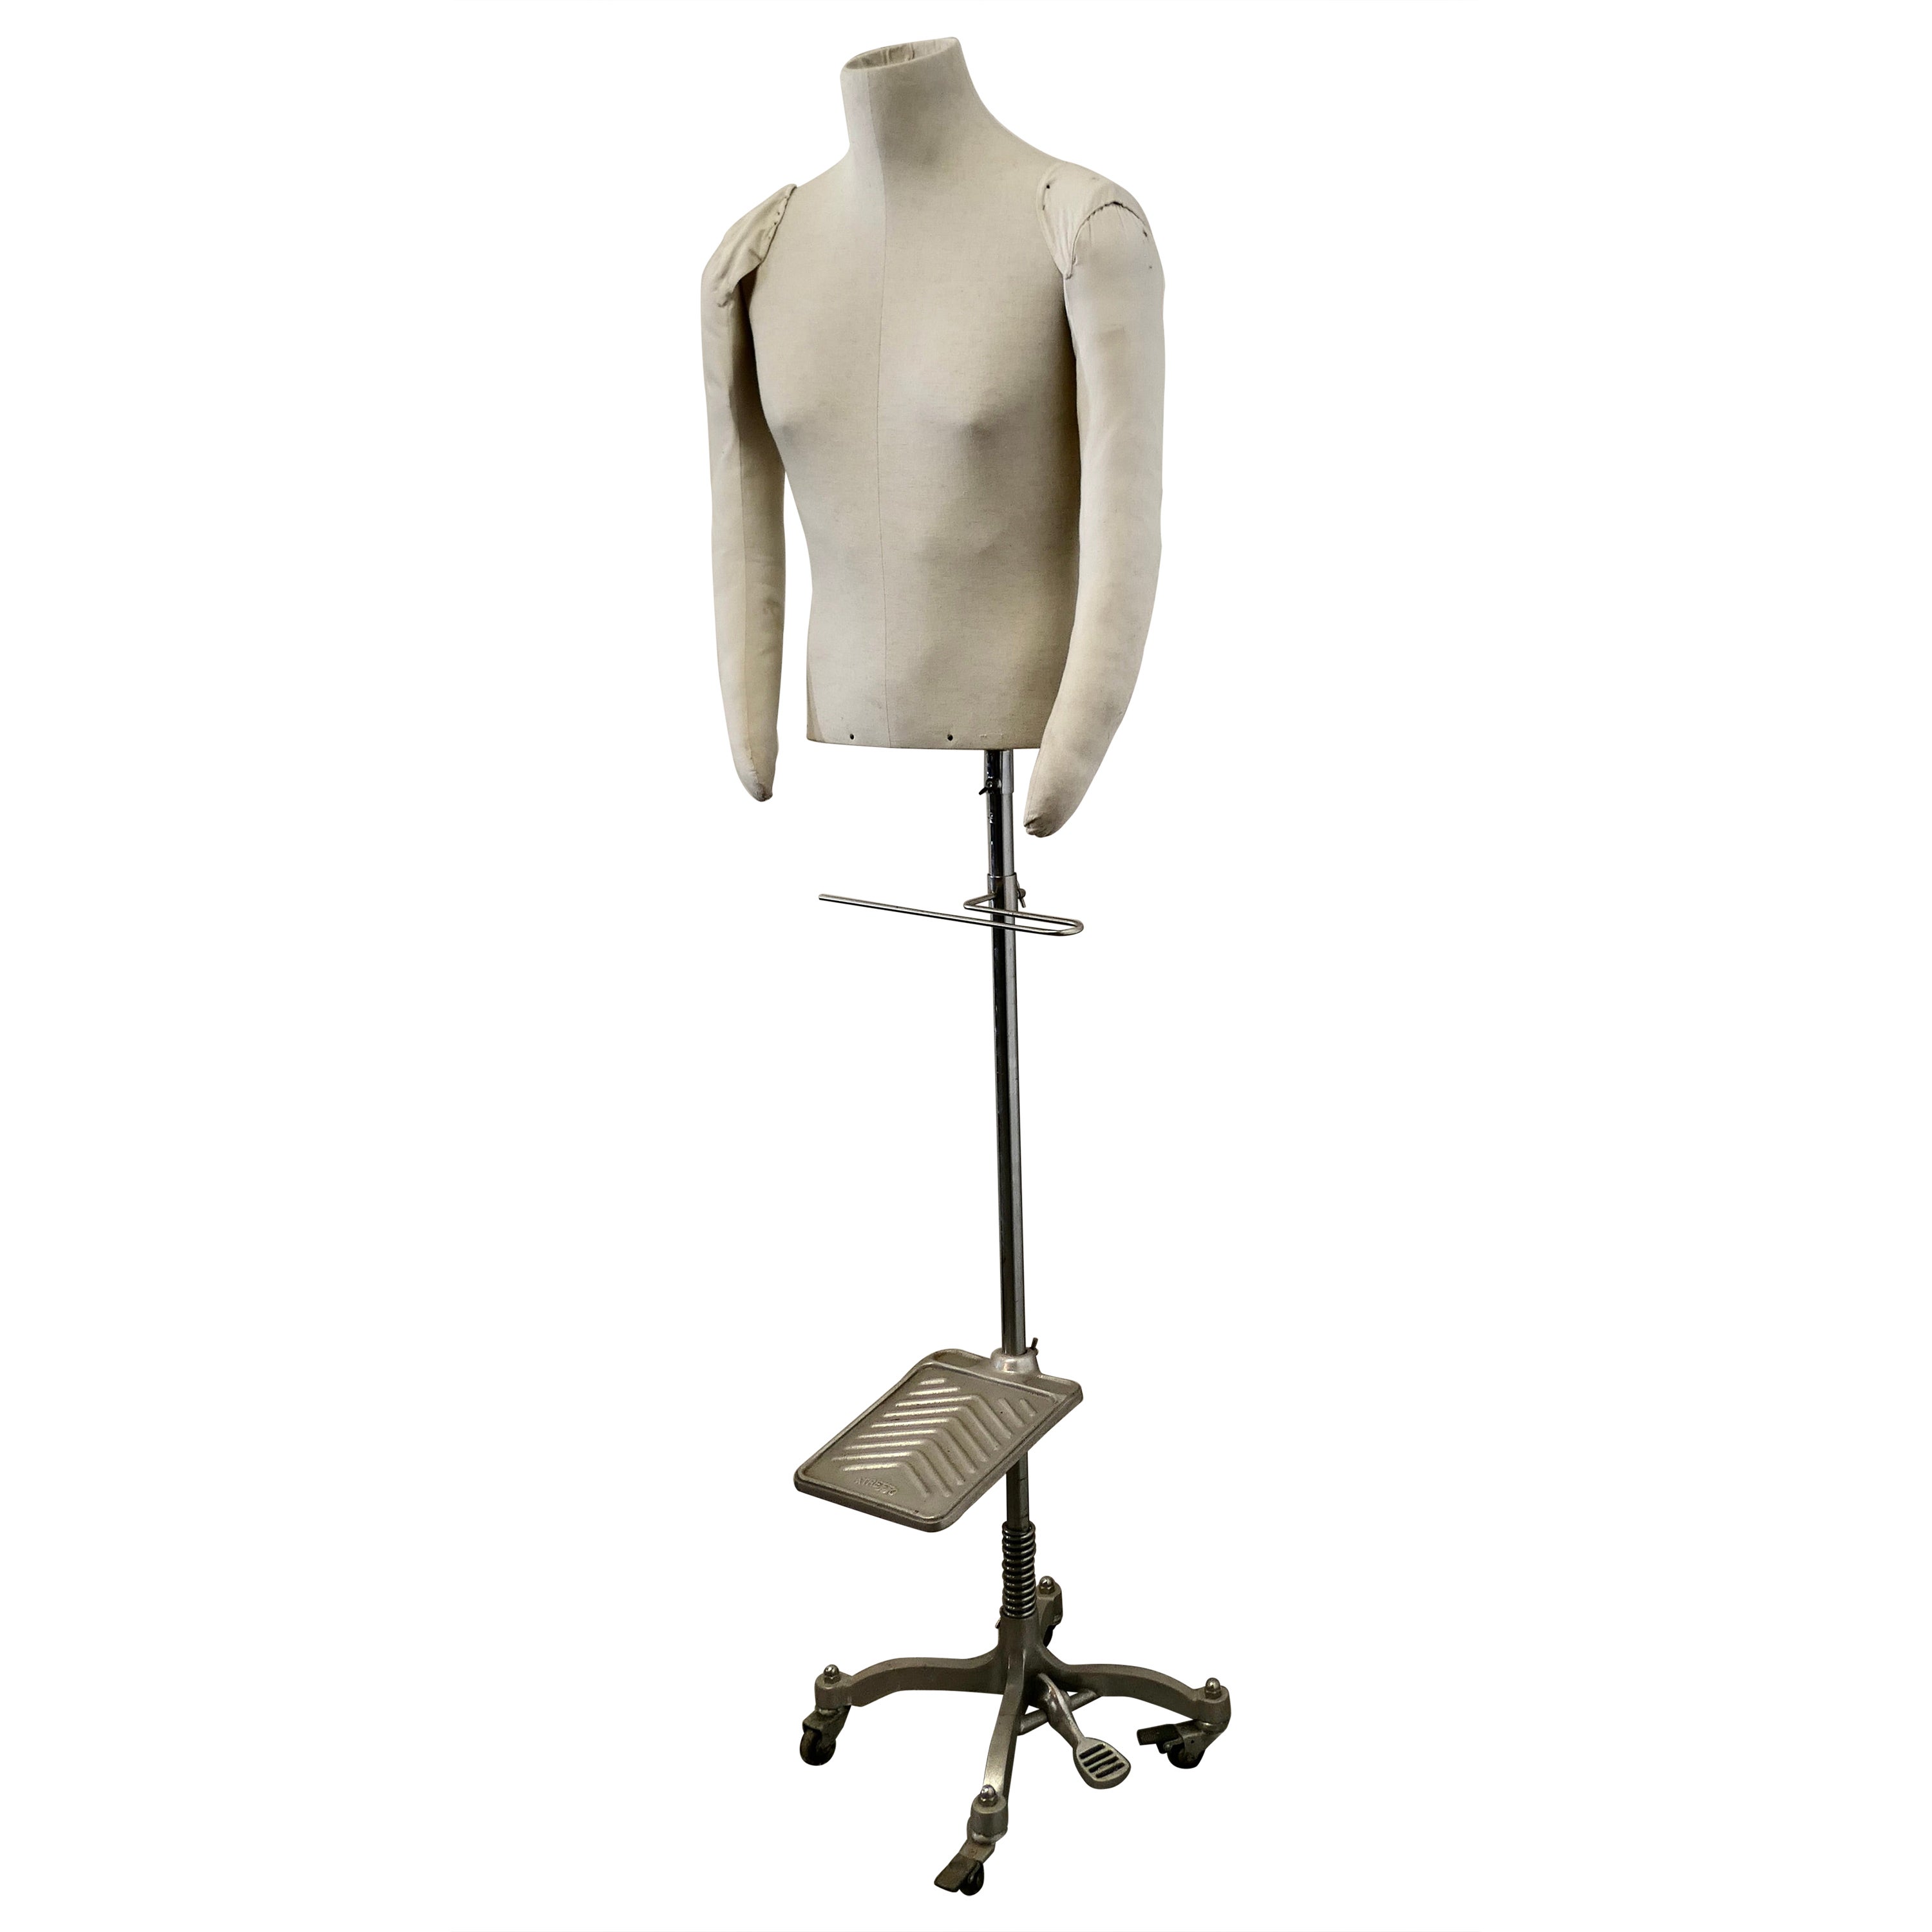 Male Mannequin or Suit Hanger Designed by Atrezzo of Barcelona    For Sale